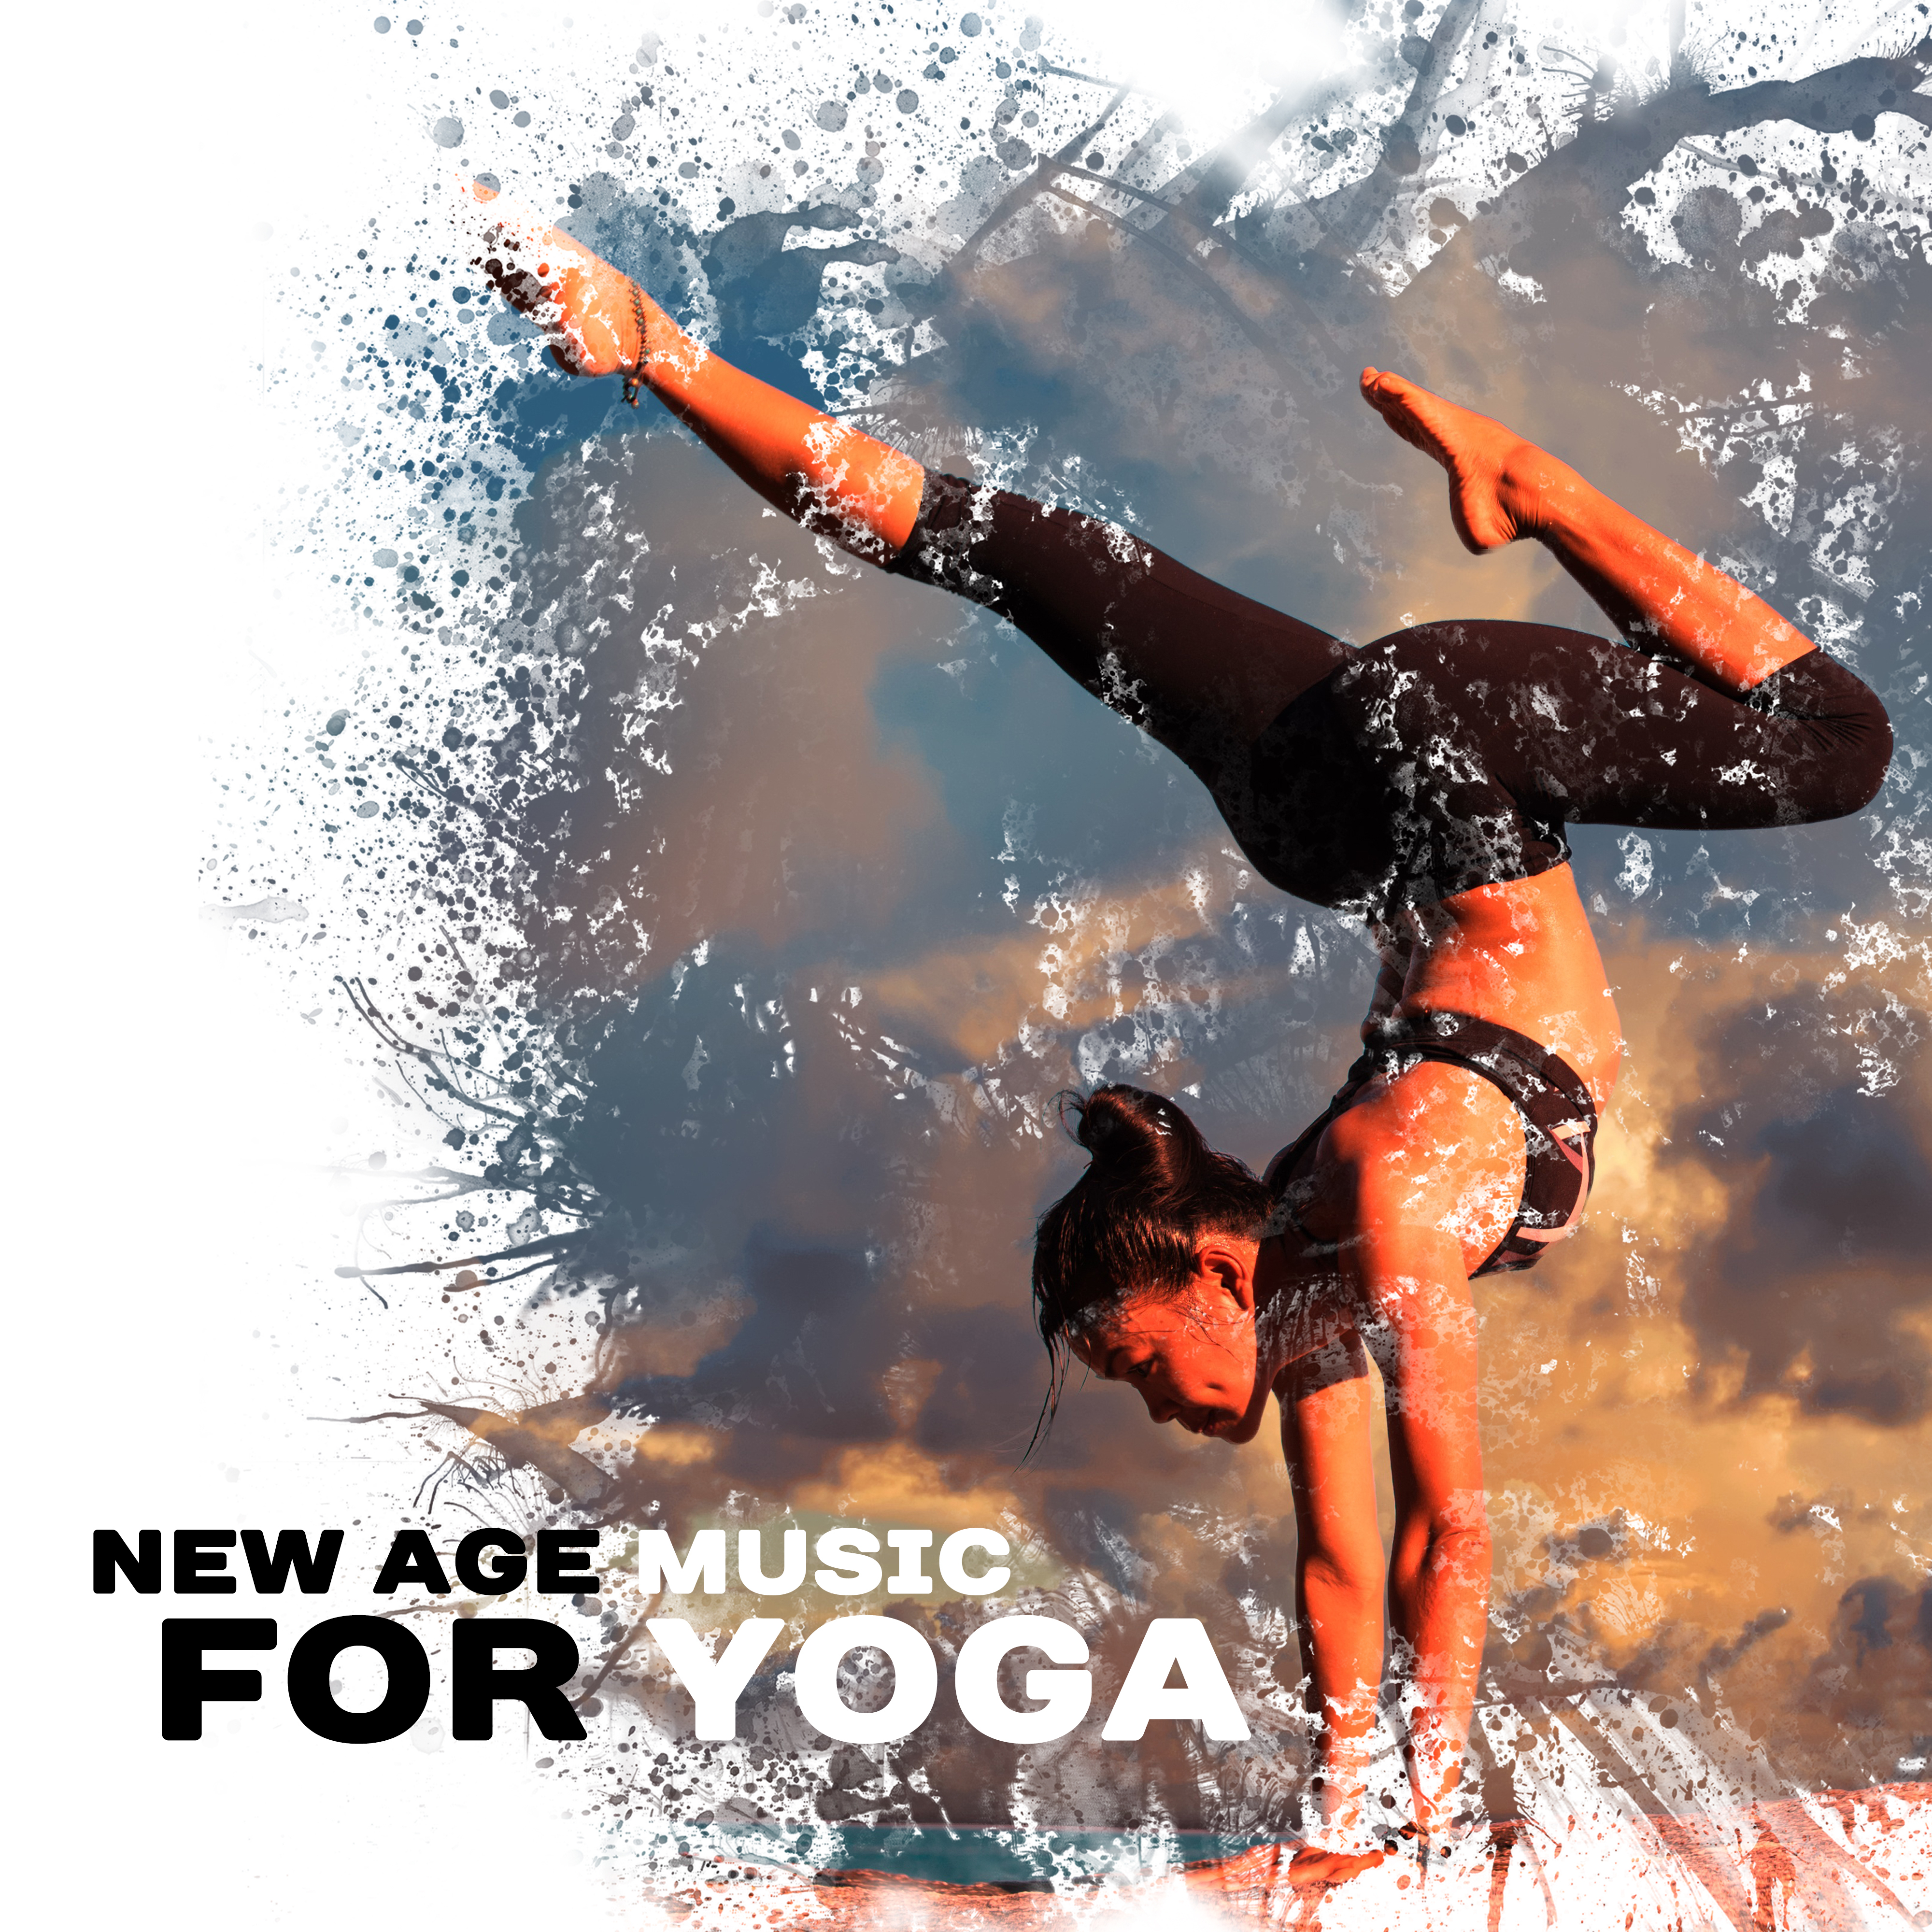 New Age Music for Yoga  Stress Relief, Inner Peace, Body Balance, Tantra Music